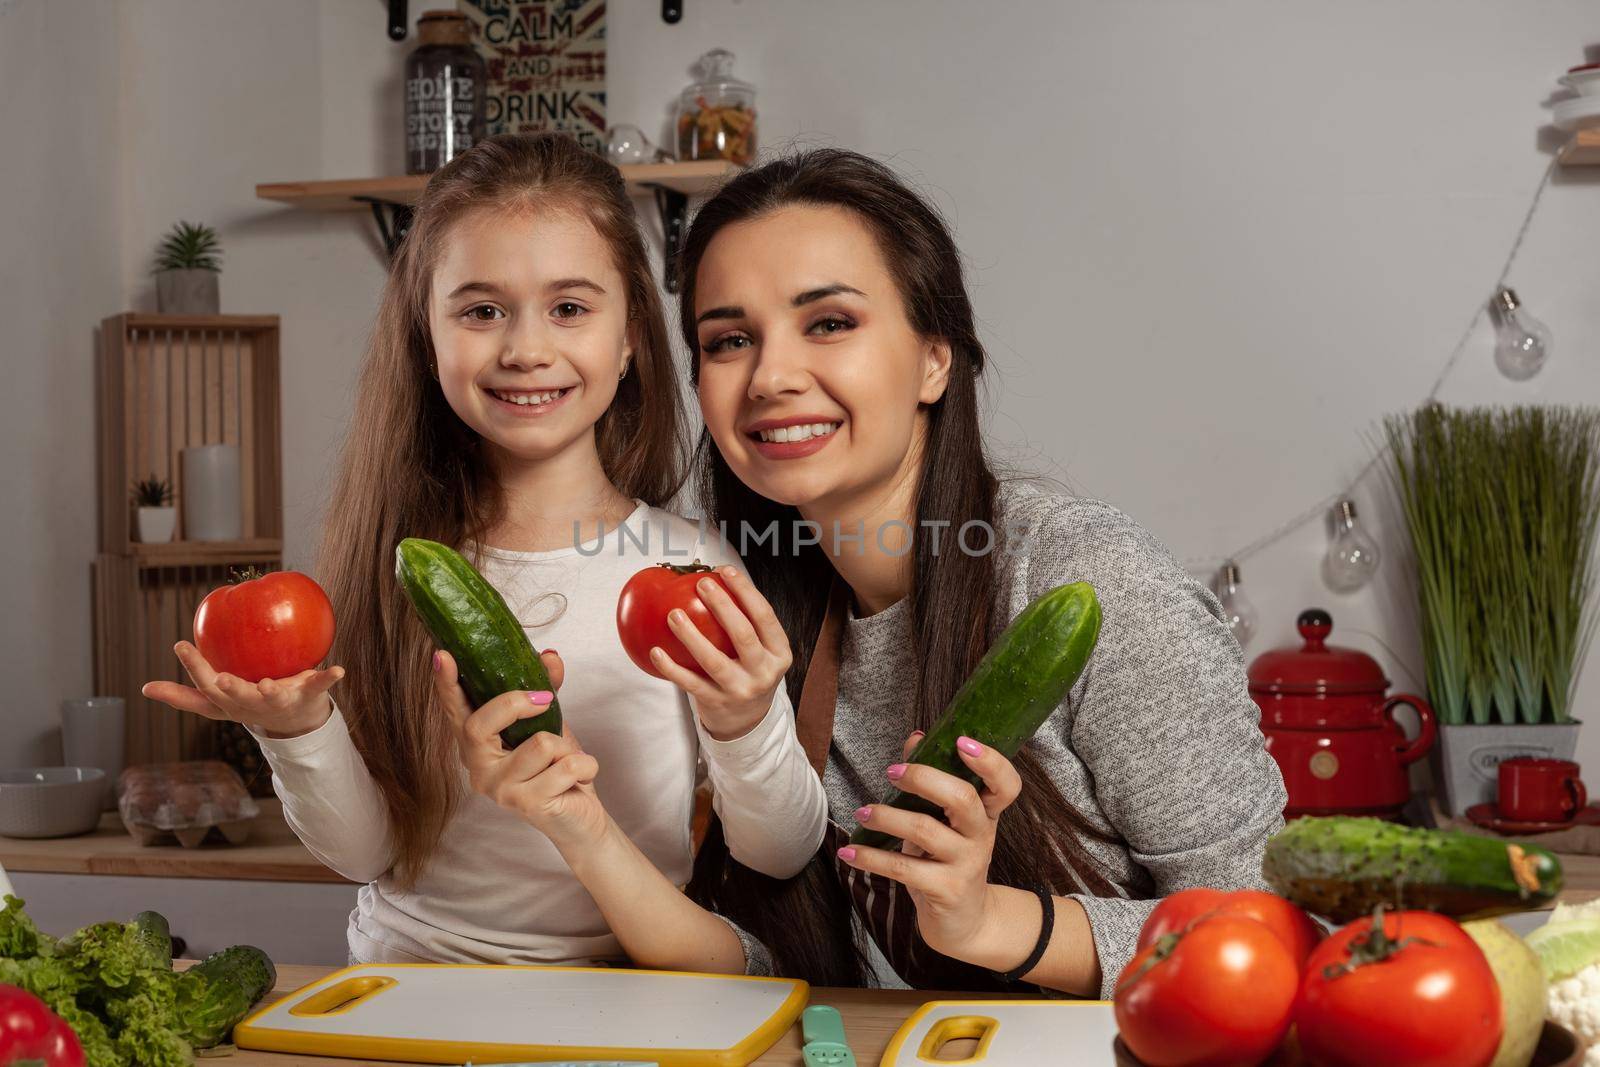 Happy loving family are cooking together. Delightful mum and her child are posing with tomato and cucumber and smiling at the kitchen, against a white wall with shelves and bulbs on it. Homemade food and little helper.